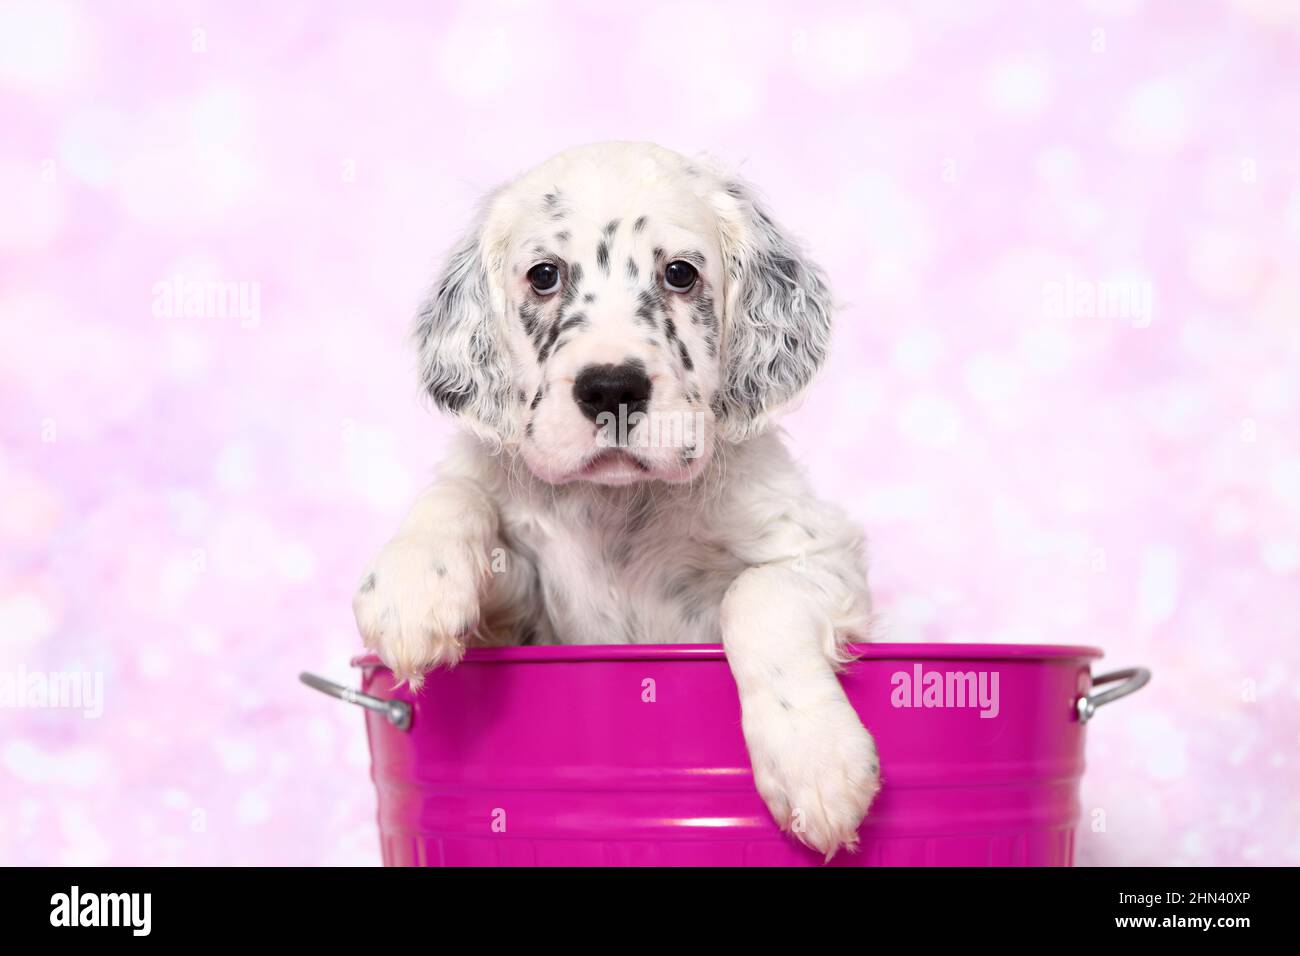 English Setter. Puppy in a bucket, seen against a pink background. Germany Stock Photo